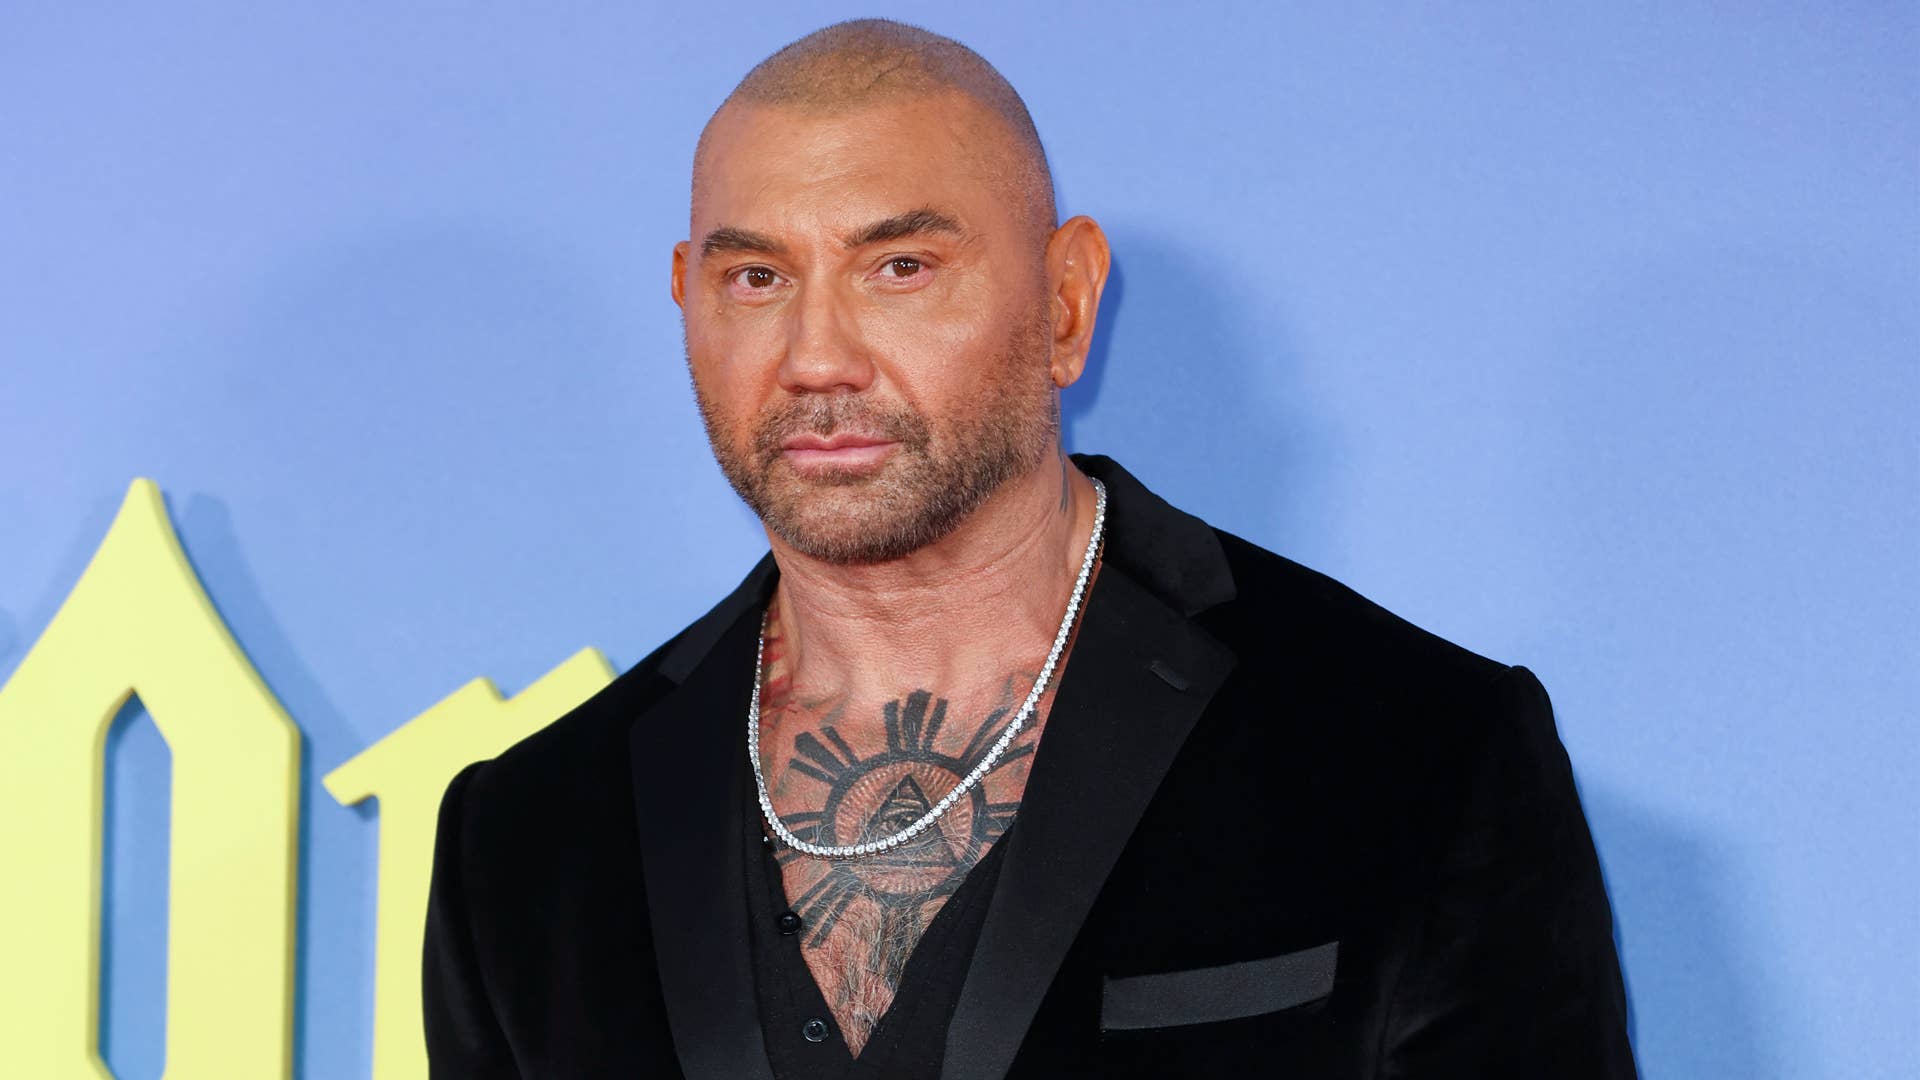 Dave Bautista on 'Relief' of Leaving MCU, Plans to Further His